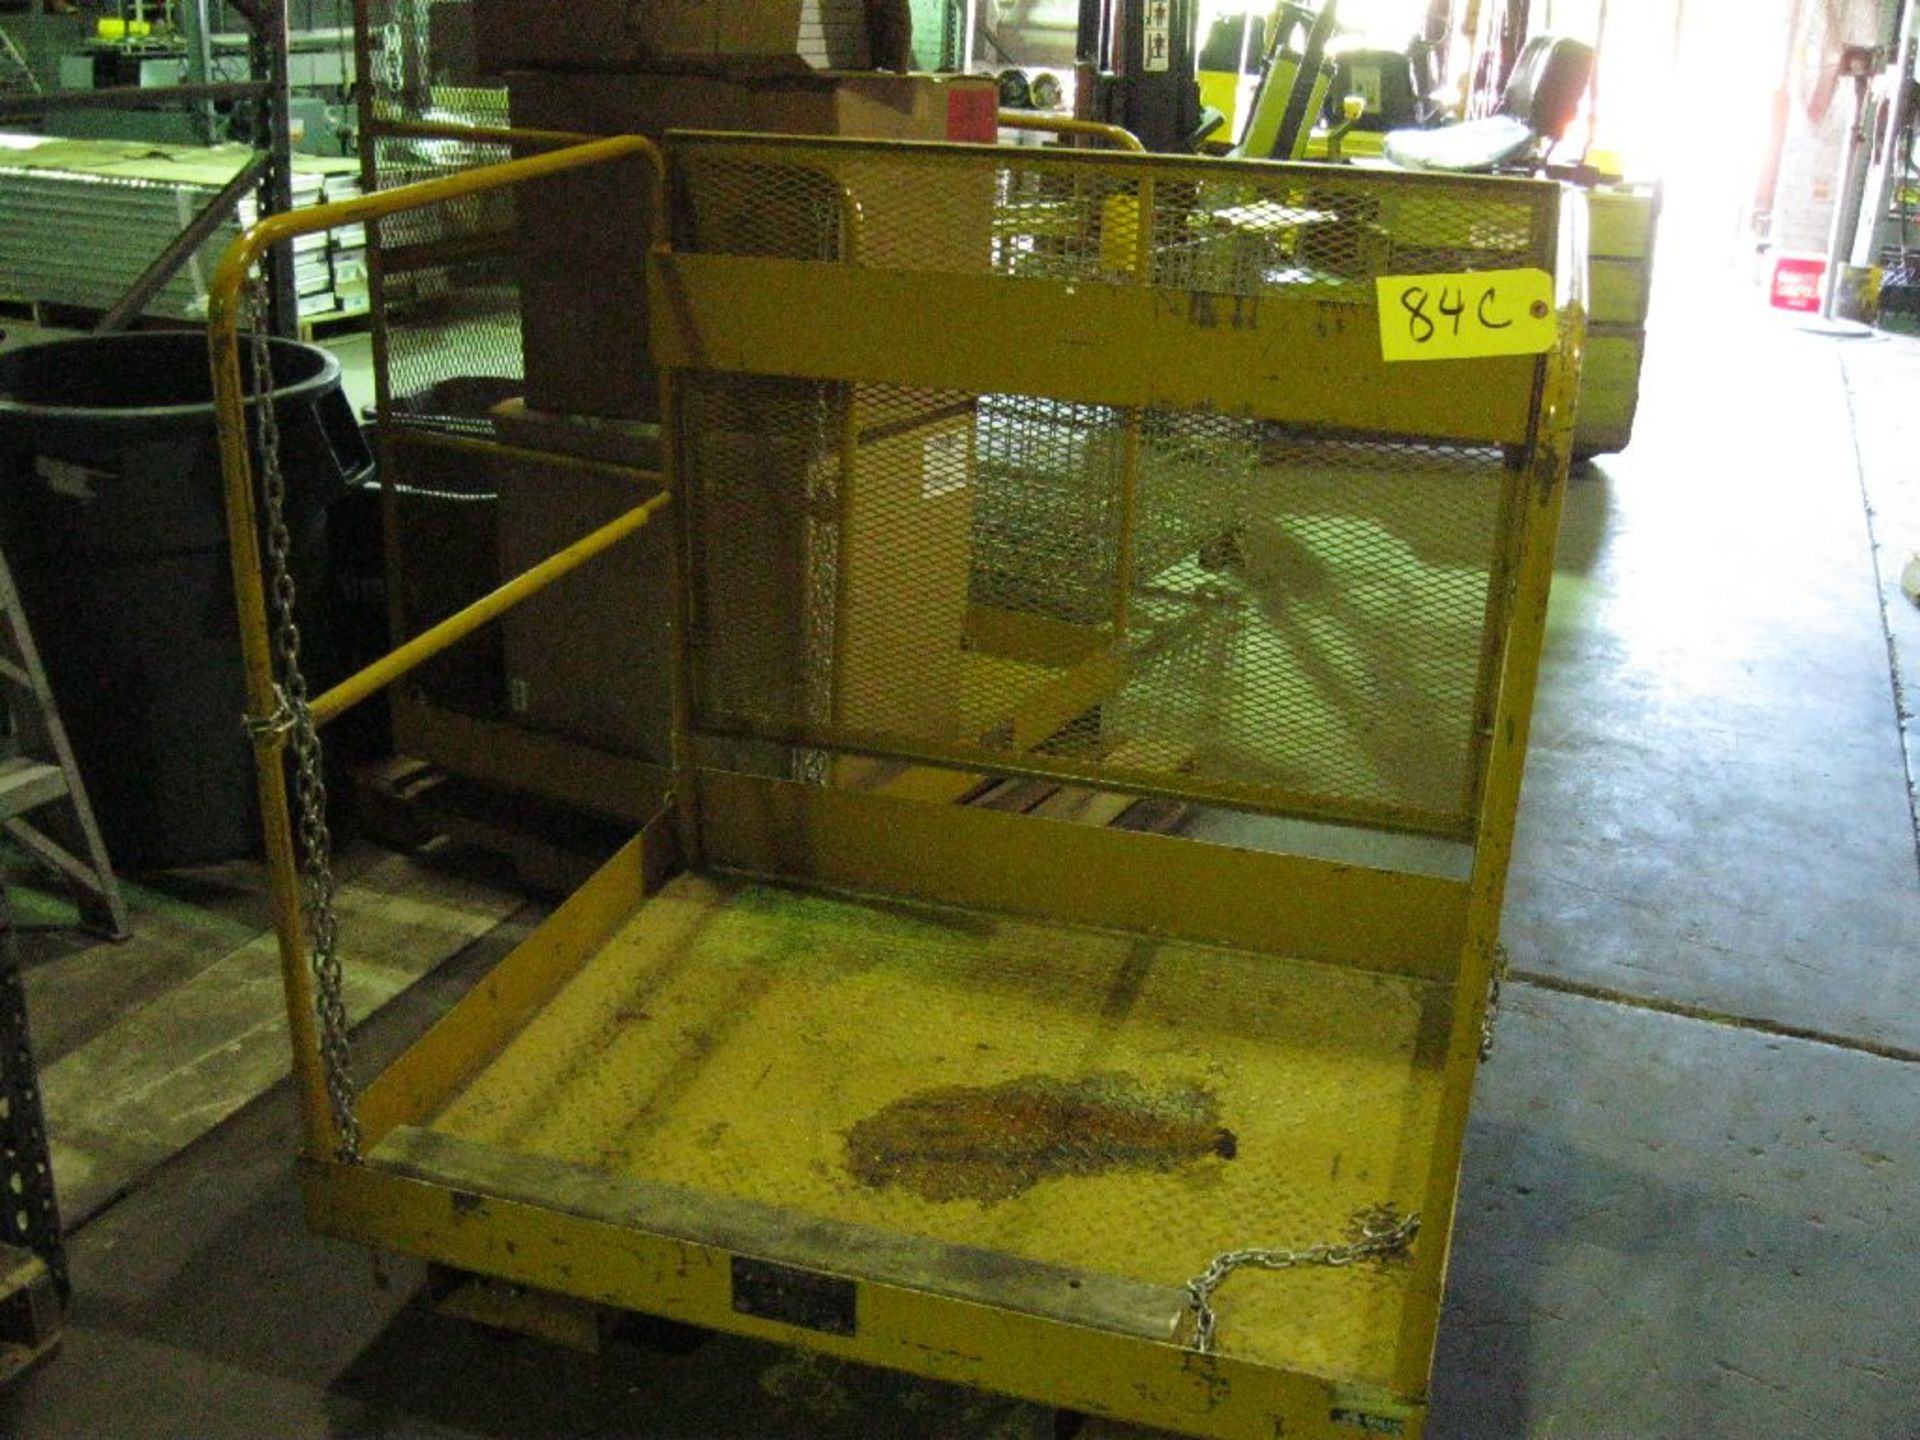 48" X 40" YELLOW SAFETY BASKET ON CASTERS